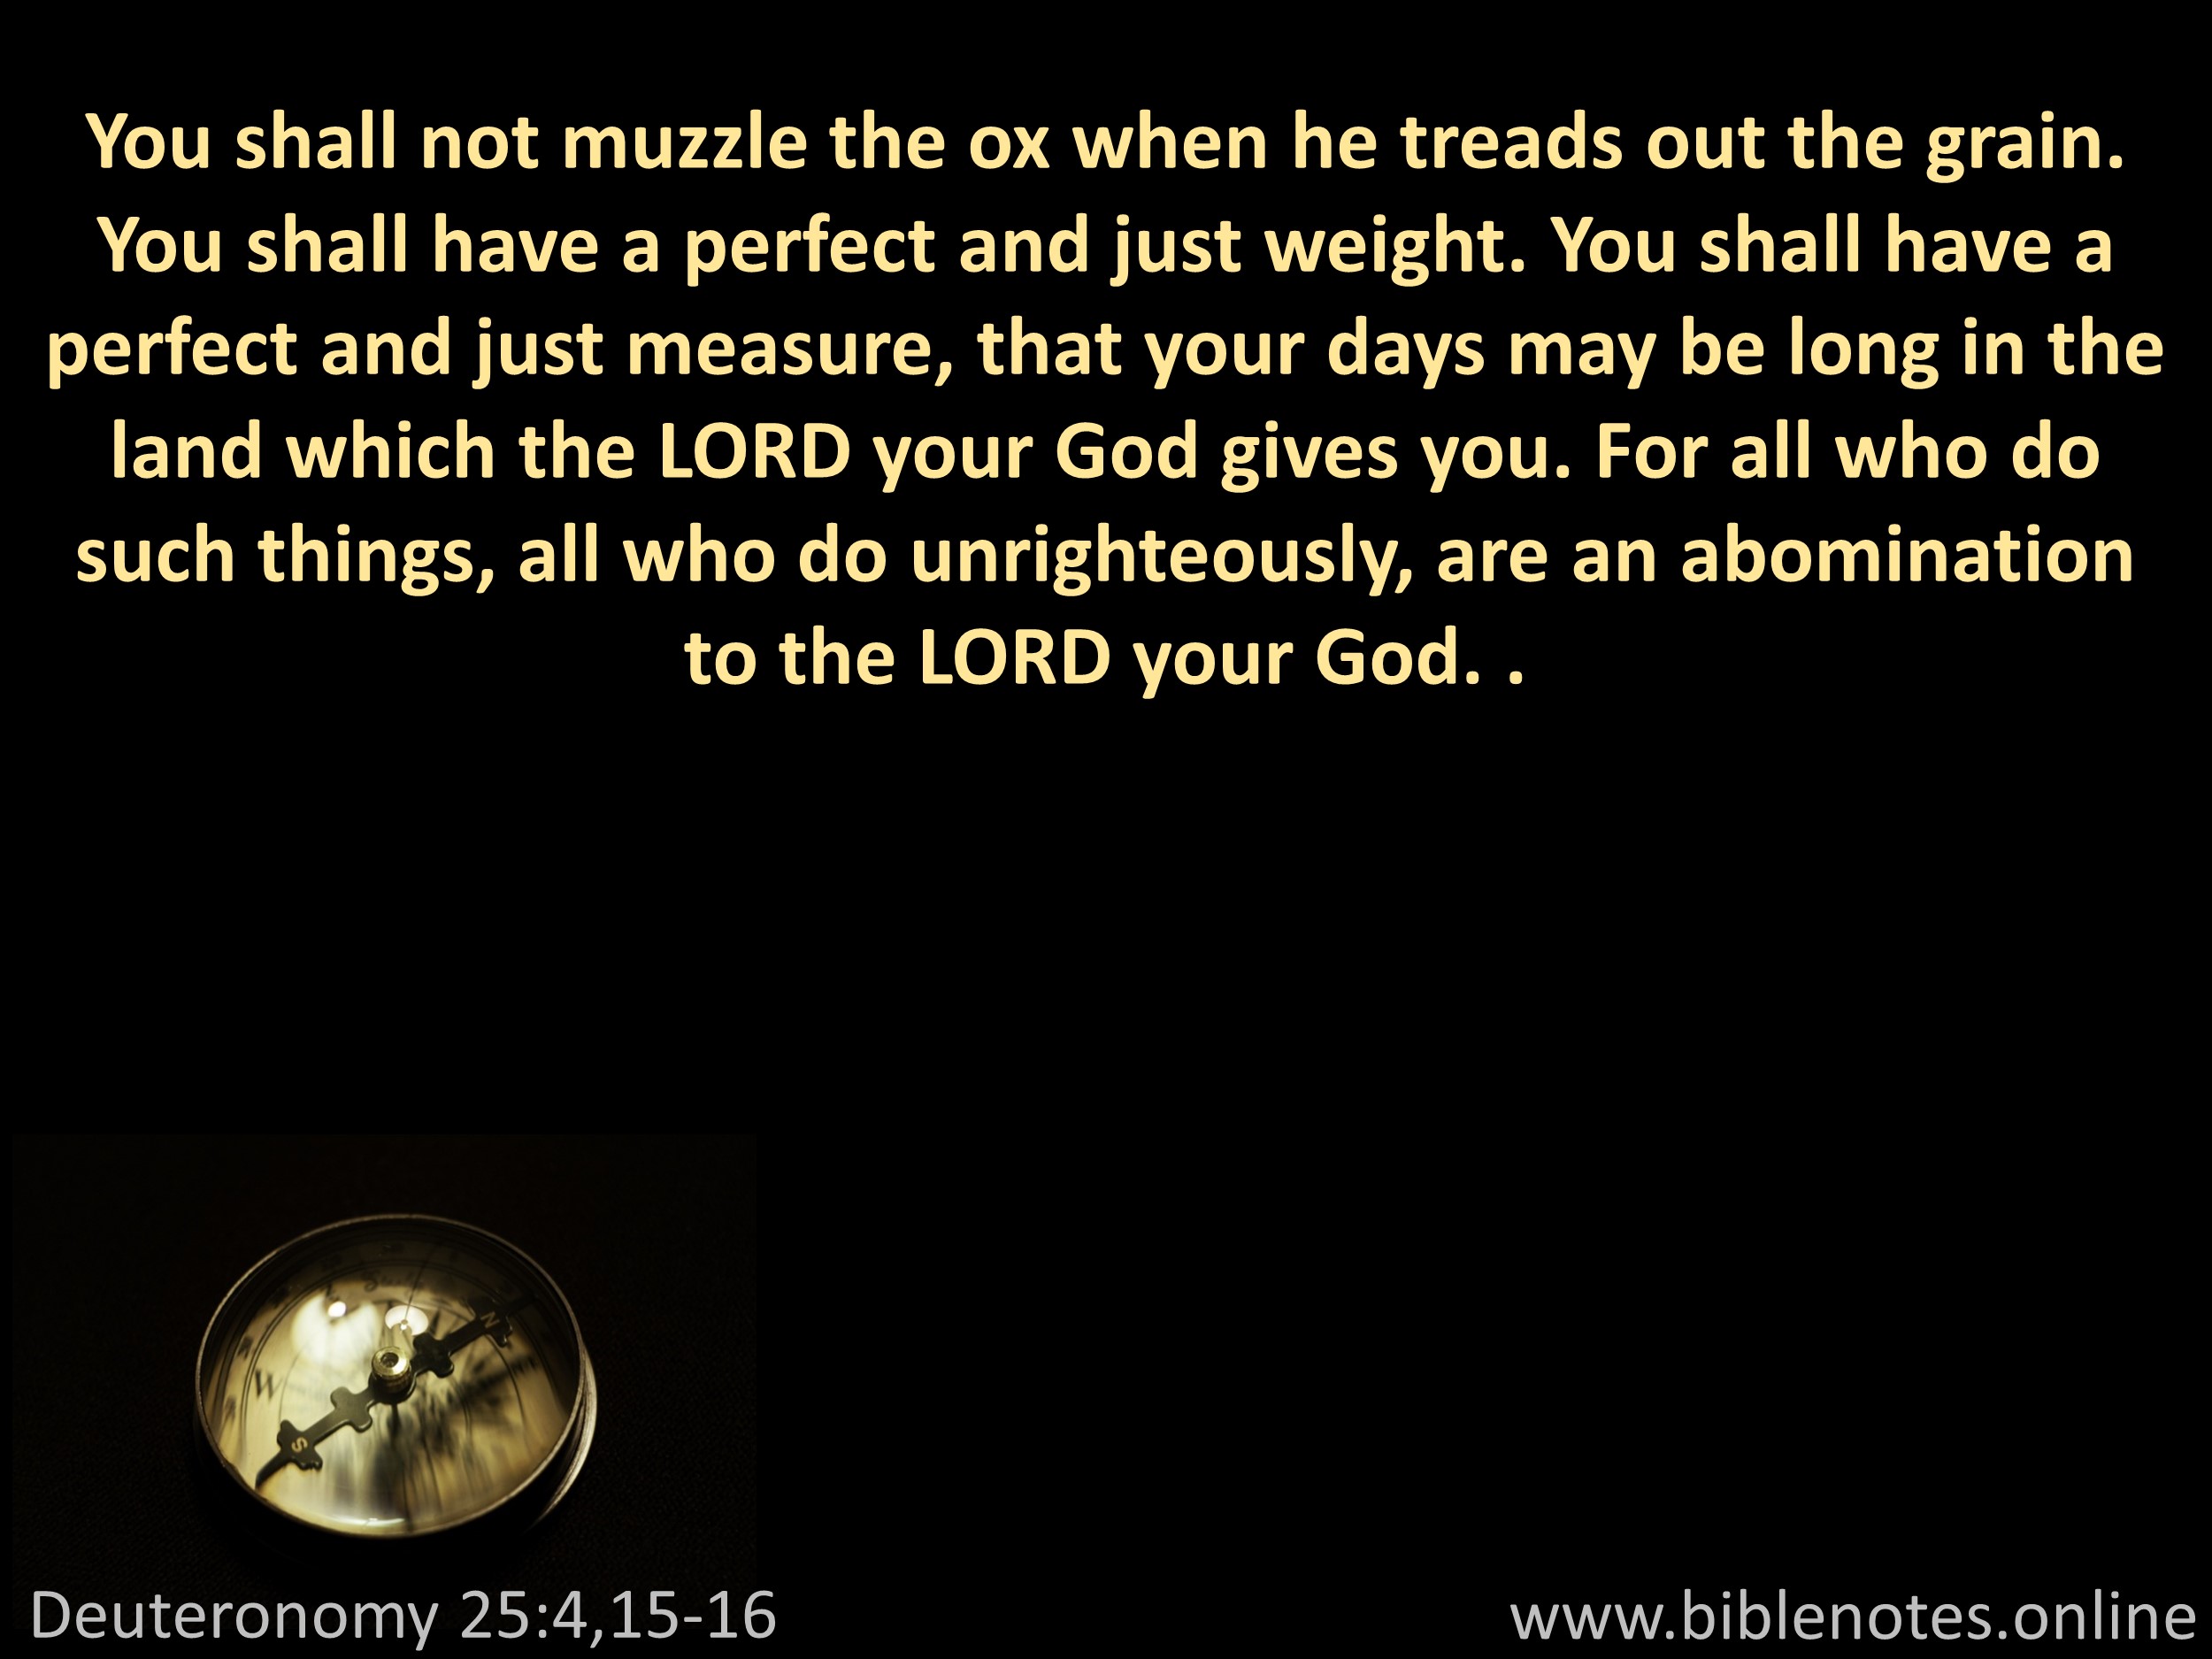 Bible Verse from Deuteronomy Chapter 25